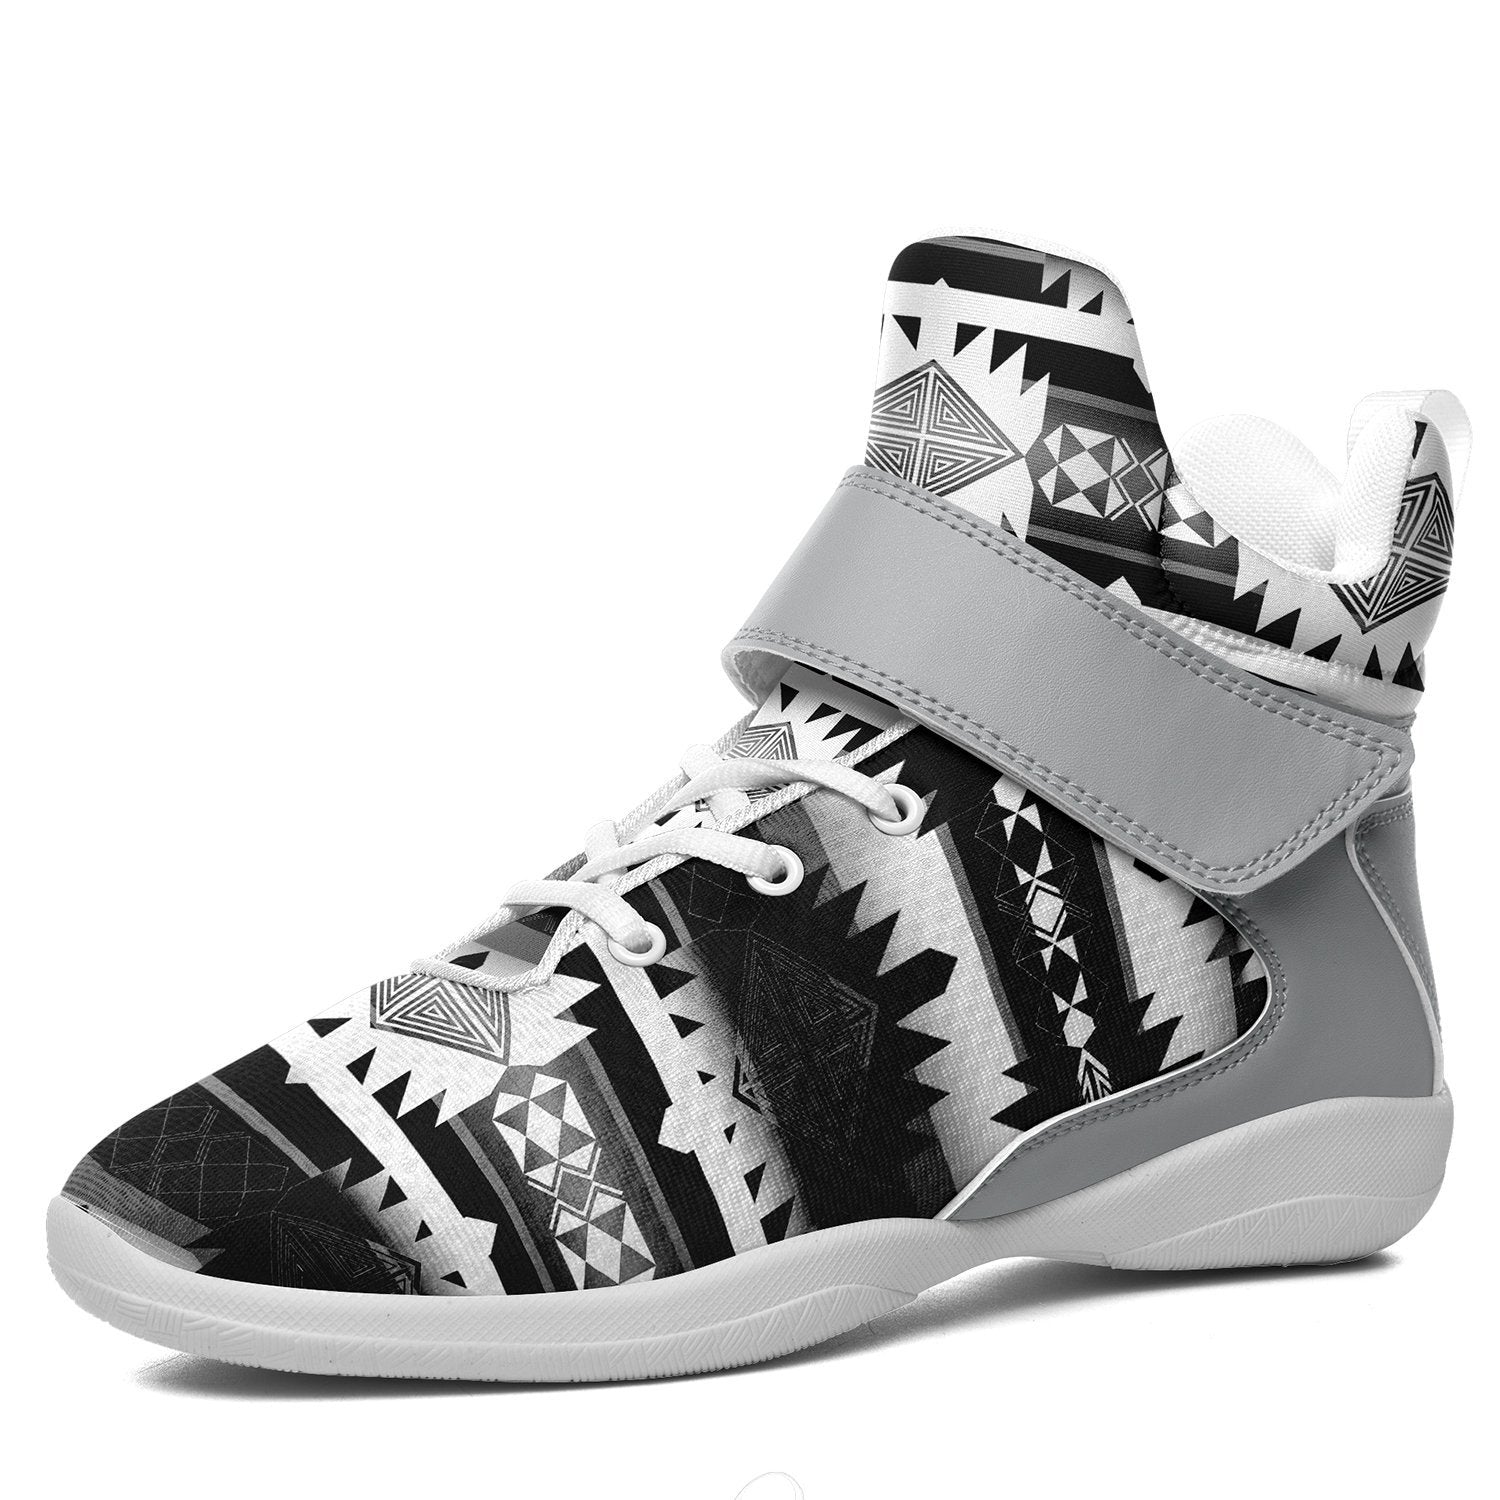 Okotoks Black and White Kid's Ipottaa Basketball / Sport High Top Shoes 49 Dzine US Child 12.5 / EUR 30 White Sole with Gray Strap 